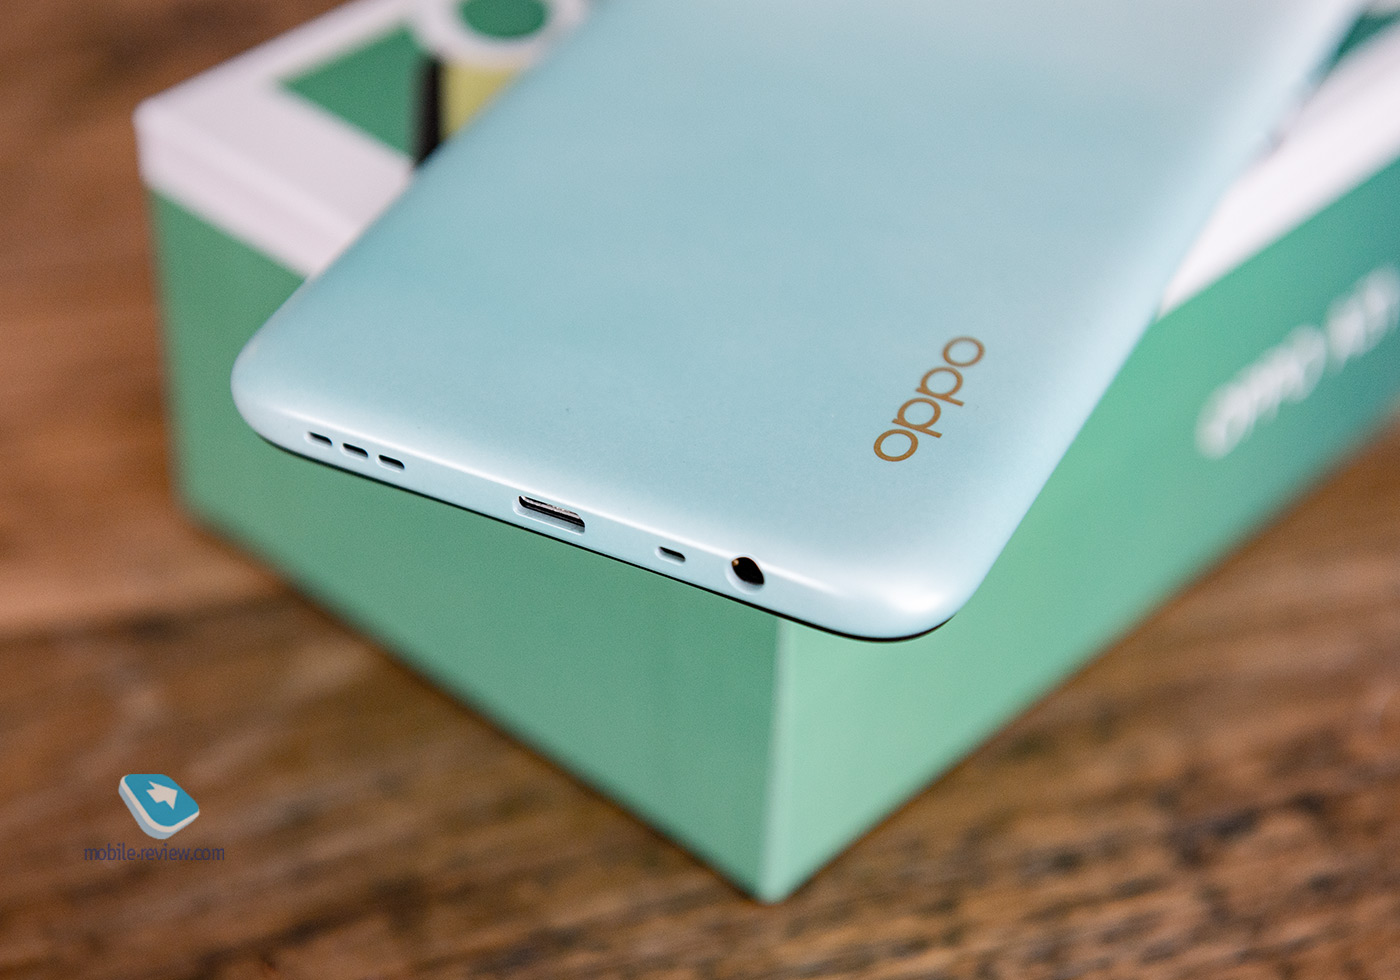 Oppo A31 (СPH2015) smartphone review